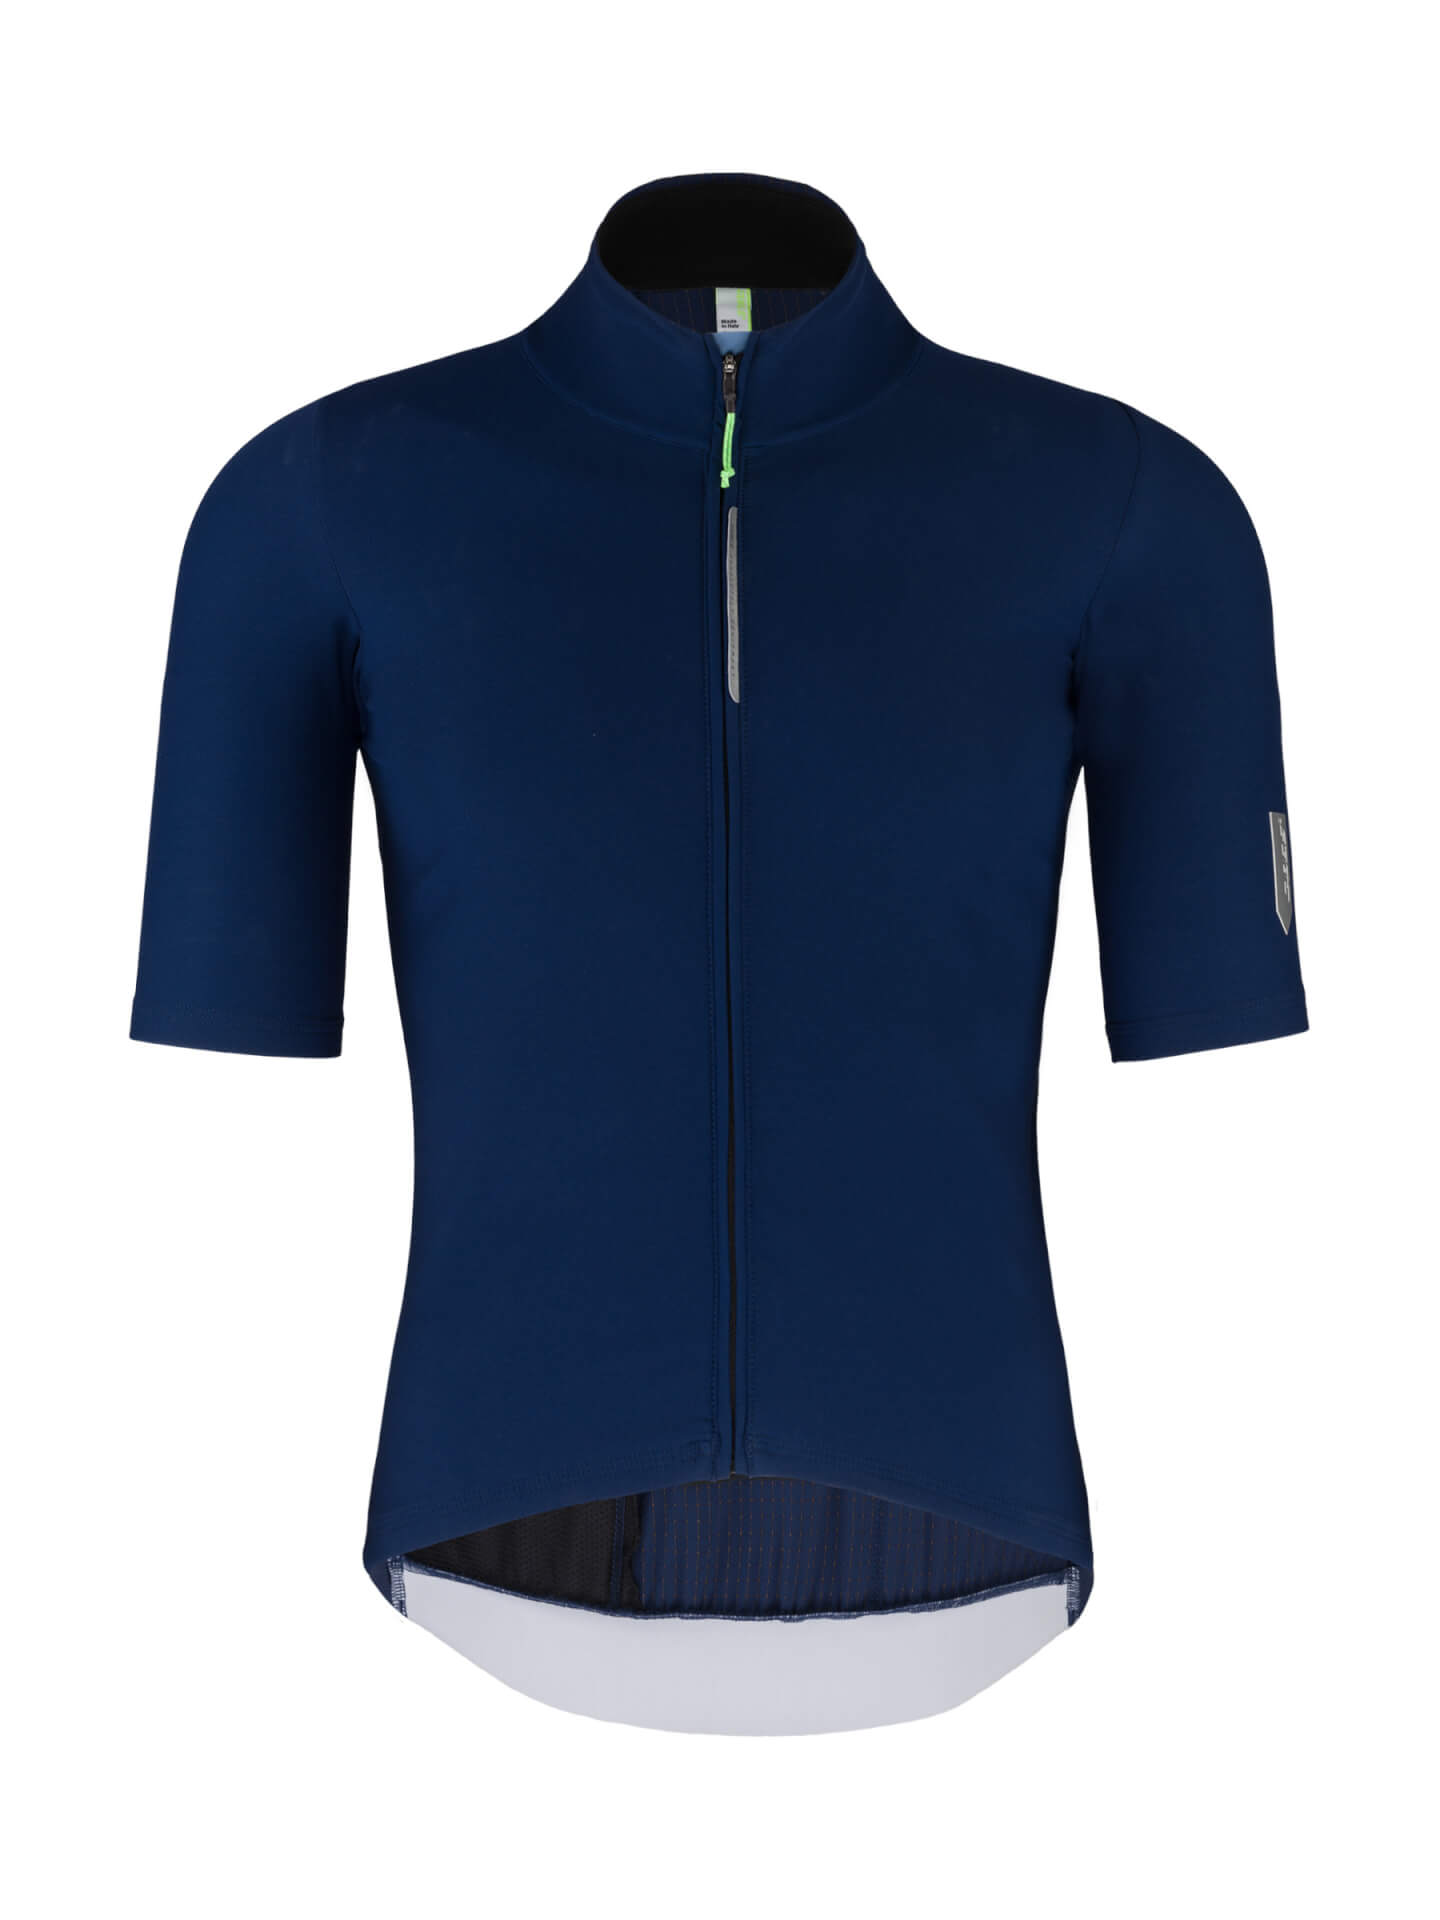 Cycling Woolf X Jersey - Navy • Q36.5